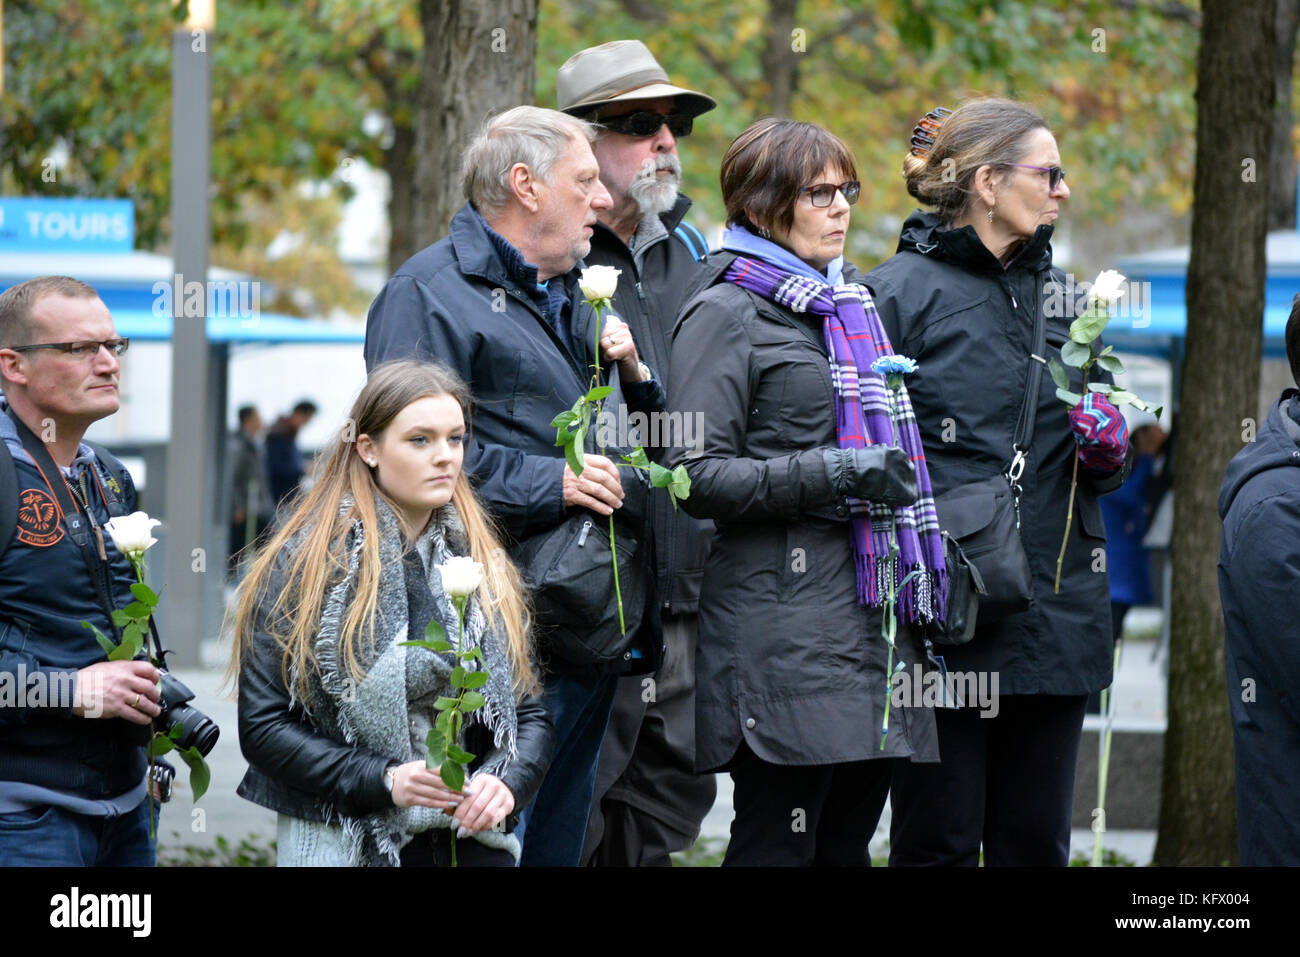 New York City, USA. 1st November, 2017. People taking part in a moment of silence to honor those killed in the terrorist truck attack in Lower Manhattan. Credit: Christopher Penler/Alamy Live News Stock Photo